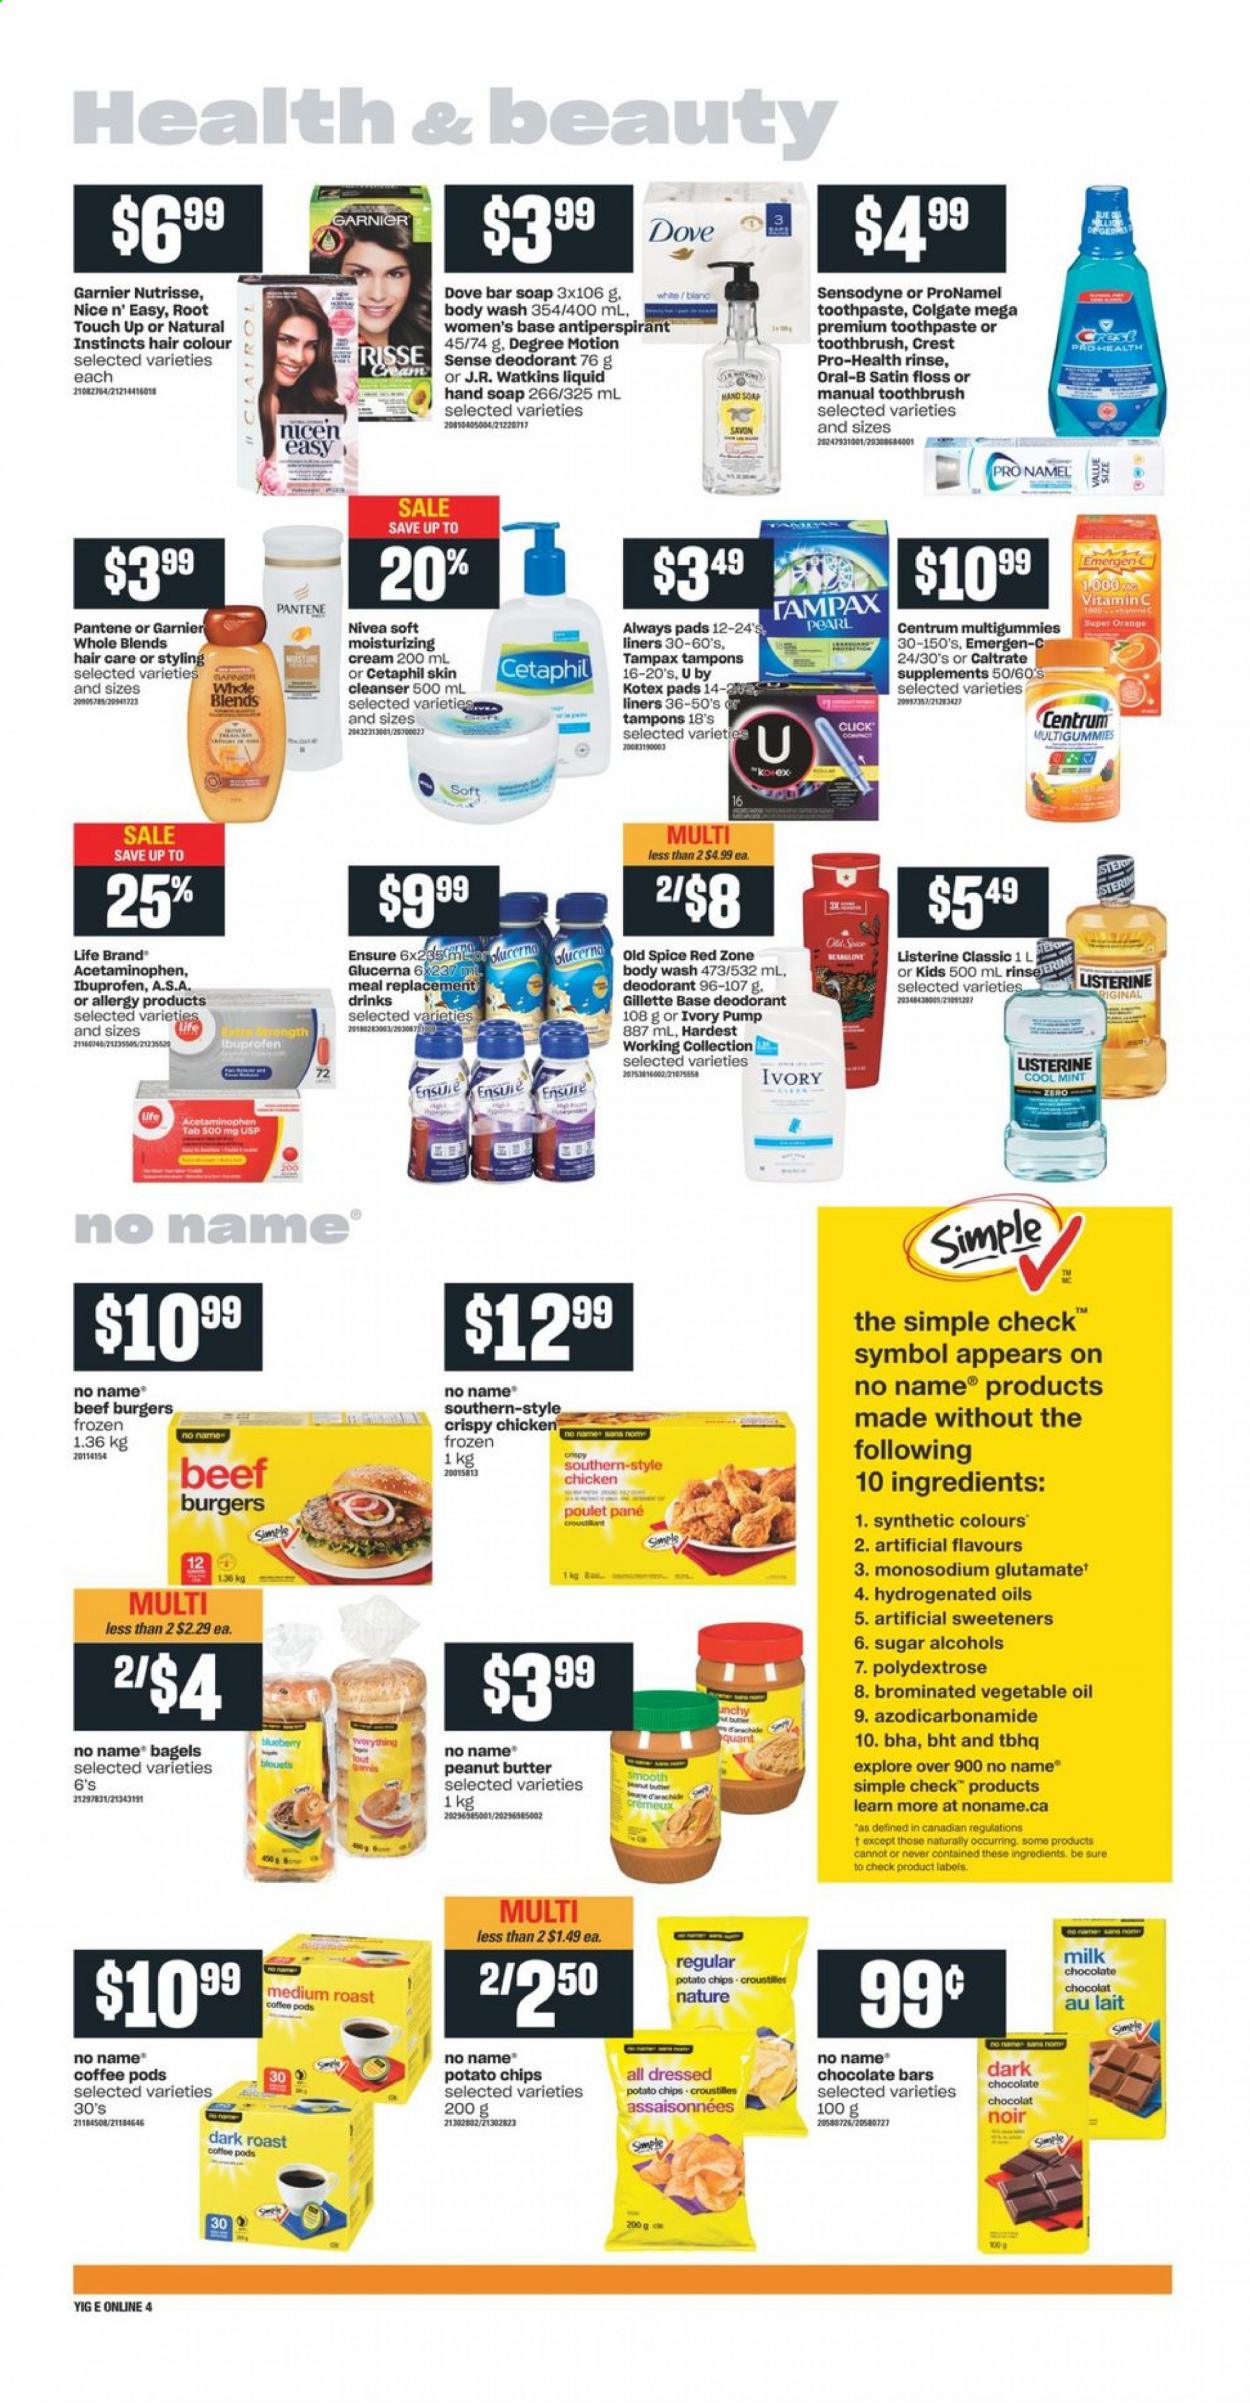 thumbnail - Independent Flyer - April 29, 2021 - May 05, 2021 - Sales products - bagels, No Name, hamburger, beef burger, milk, chocolate bar, potato chips, sugar, spice, vegetable oil, oil, peanut butter, coffee pods, body wash, hand soap, soap bar, soap, toothbrush, toothpaste, Crest, Always pads, Kotex, Kotex pads, tampons, cleanser, hair color, anti-perspirant, Sure, vitamin c, Ibuprofen, Glucerna, Emergen-C, Centrum, Garnier, Gillette, Listerine, Tampax, Pantene, Nivea, Old Spice, Oral-B, Sensodyne, pump, deodorant. Page 8.